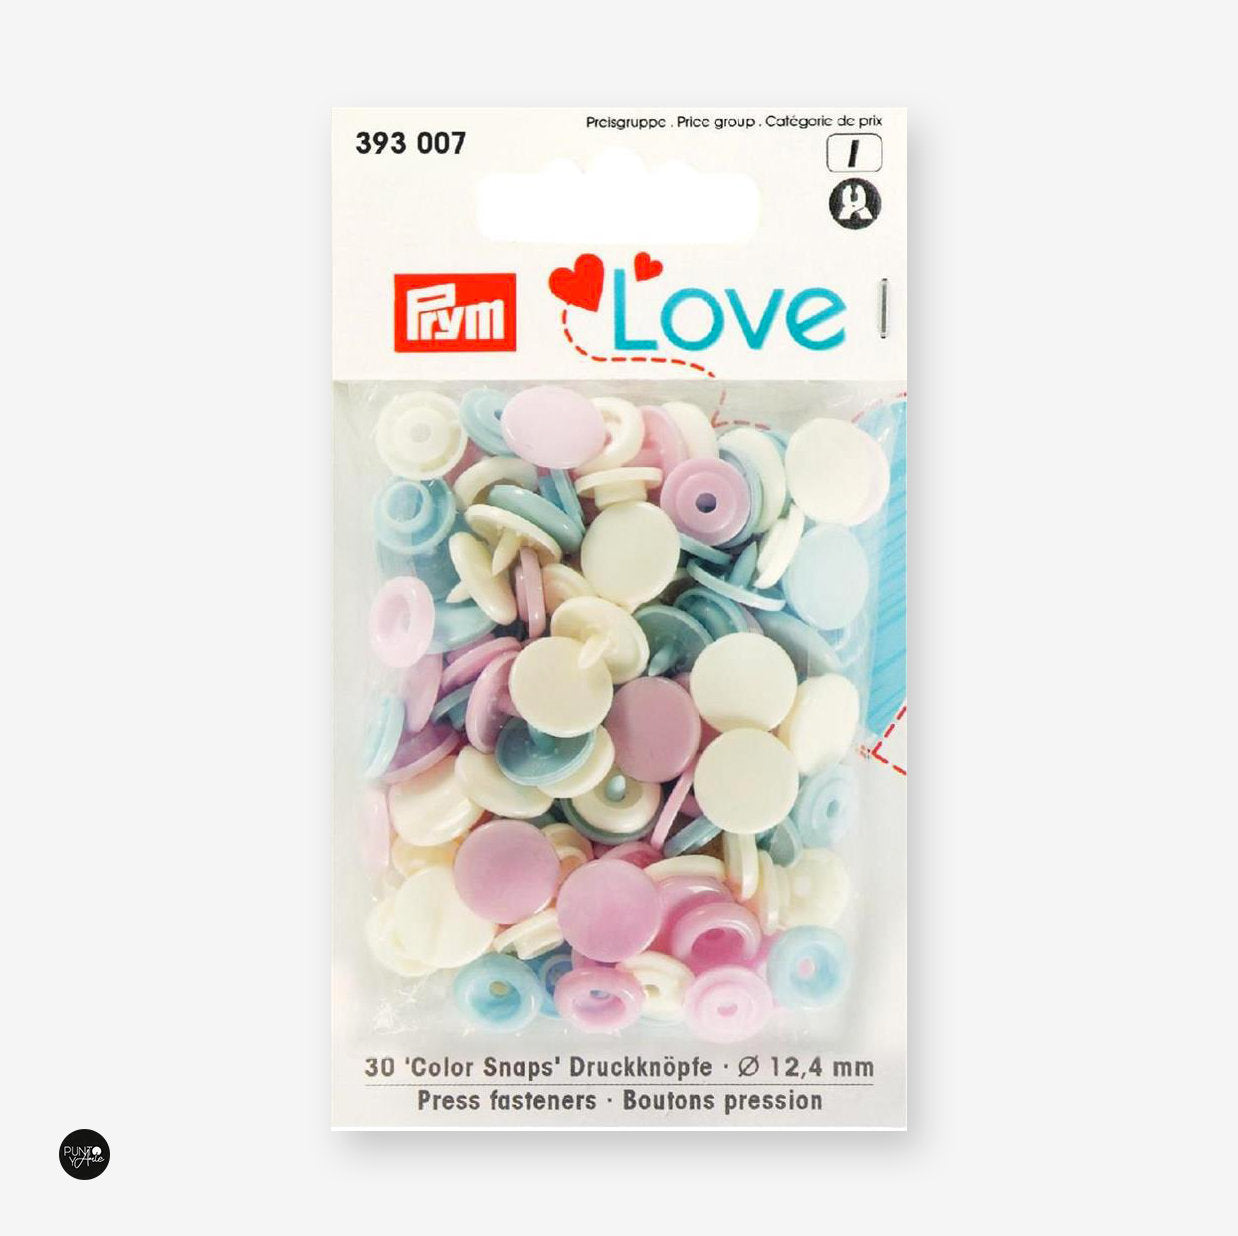 Press Buttons Or Snaps 12.44 mm - Prym Love 393007